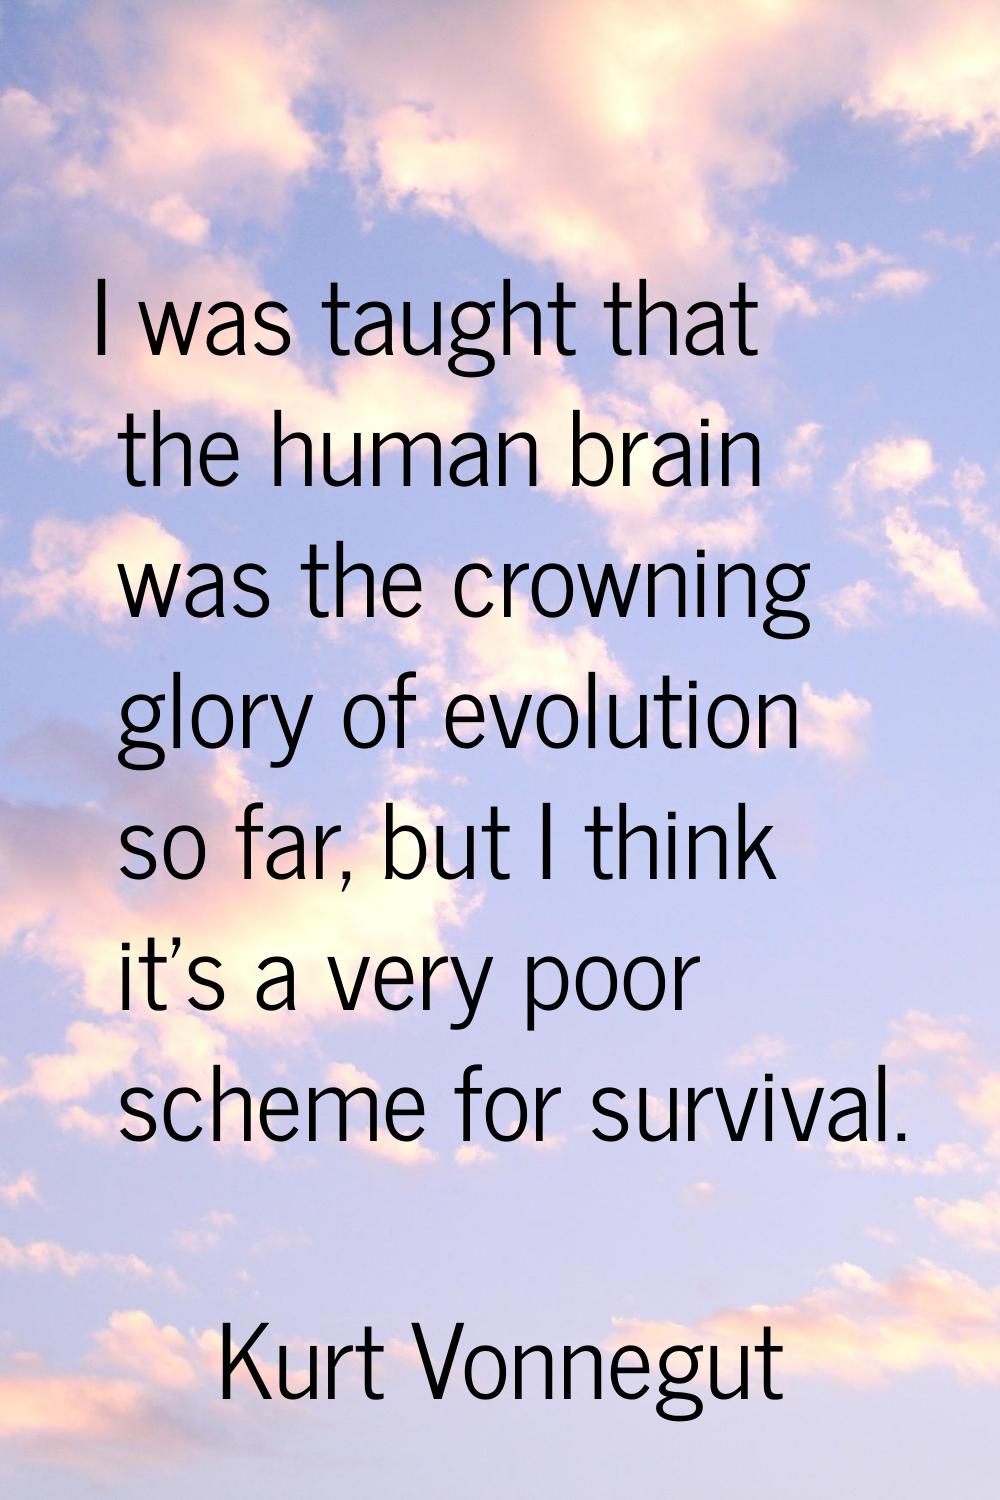 I was taught that the human brain was the crowning glory of evolution so far, but I think it's a ve